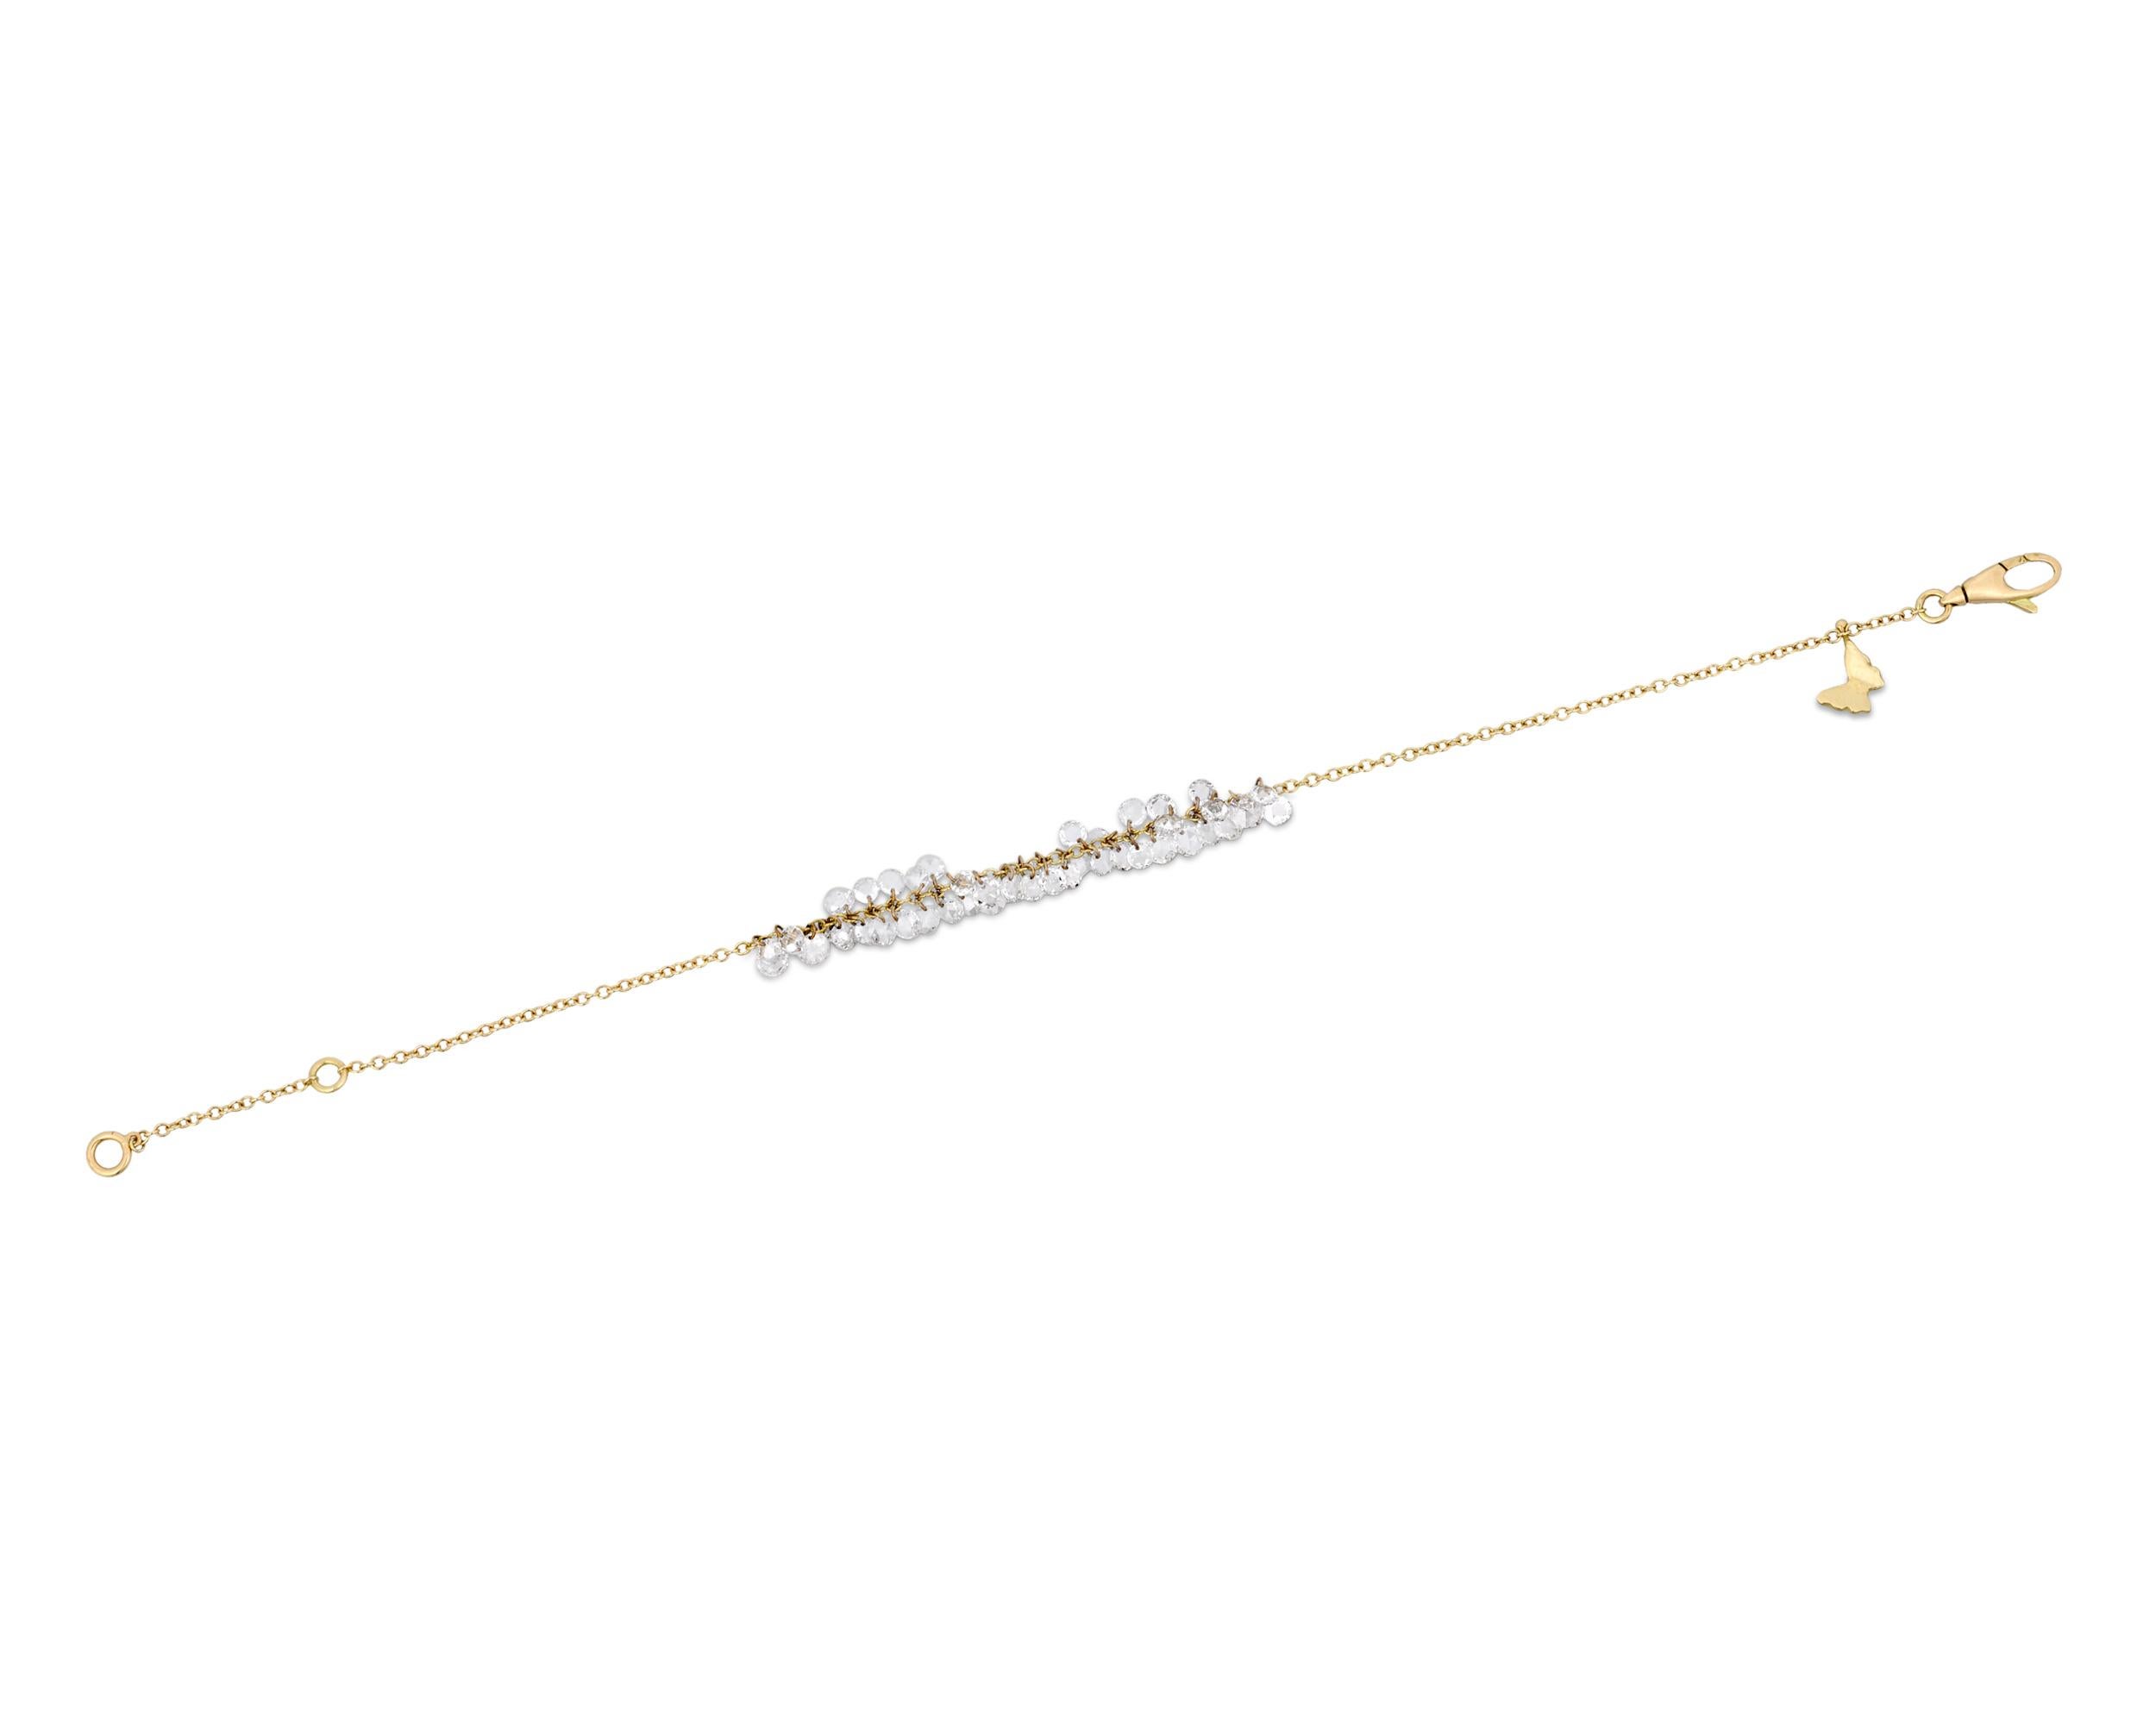 An array of rose-cut diamonds weighing 2.02 carats dazzle in this contemporary take on the classic diamond bracelet. Each diamond is individually linked to the 18K yellow gold chain for maximum movement and sparkle.

7